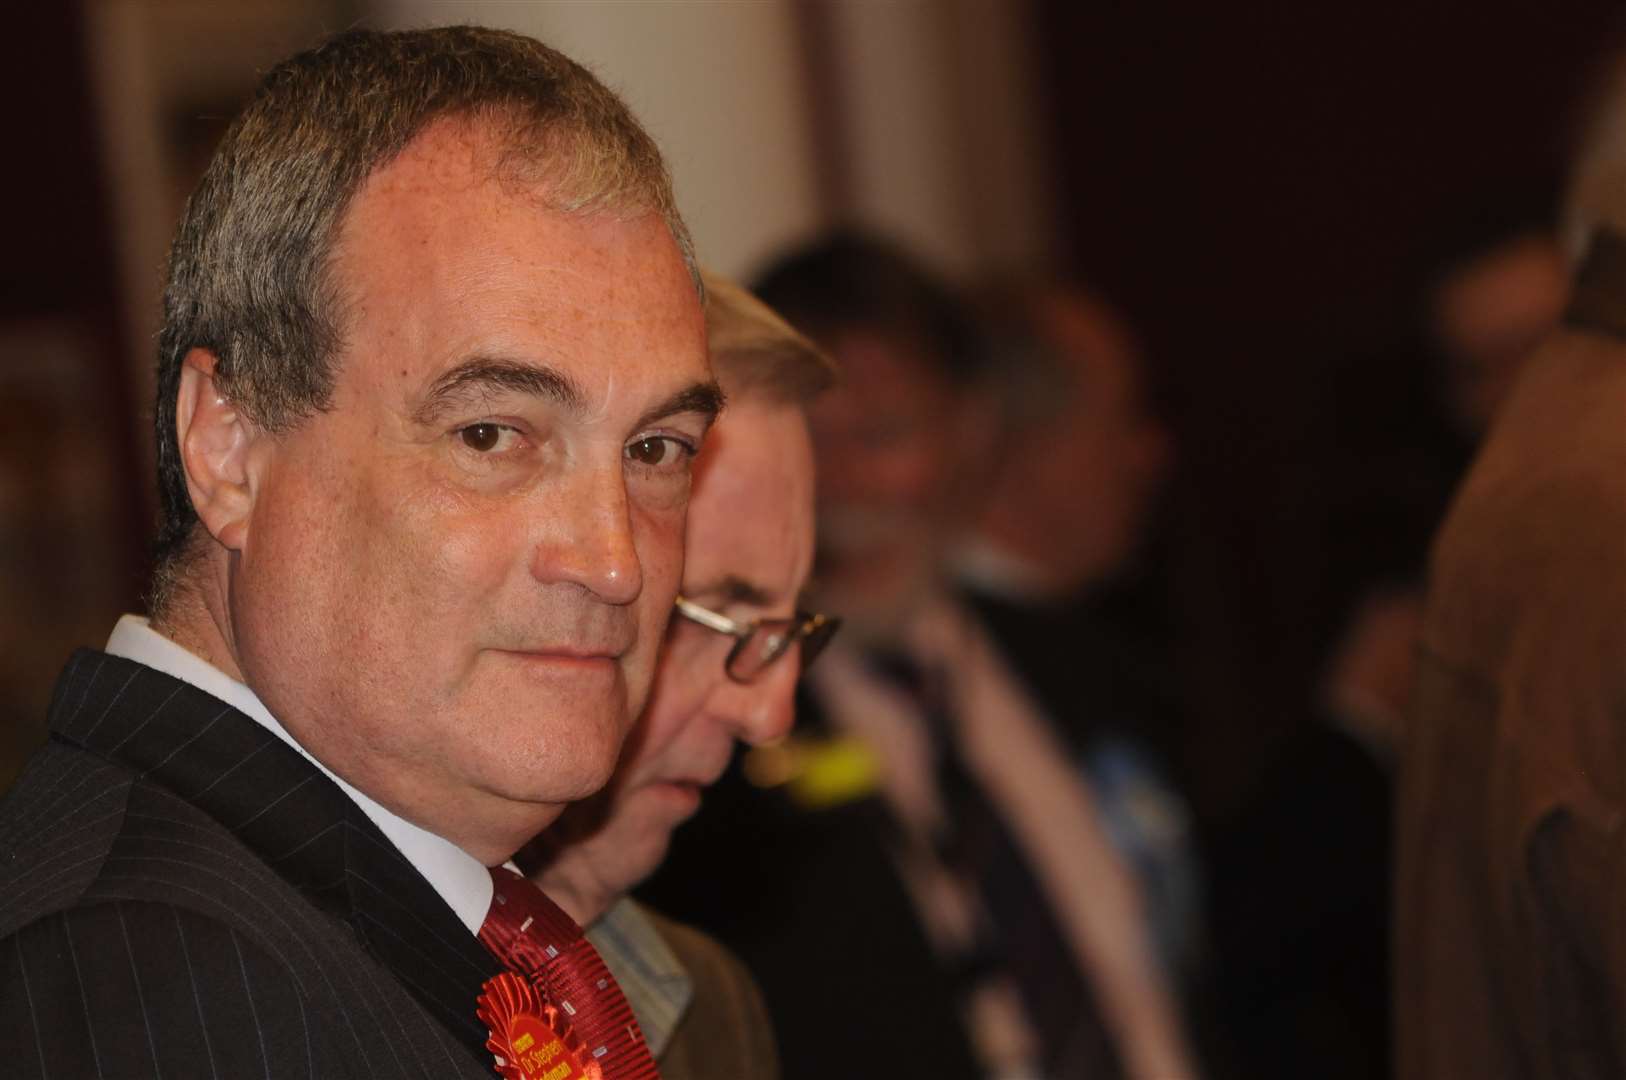 Stephen Ladyman bowed out following his 2010 election defeat